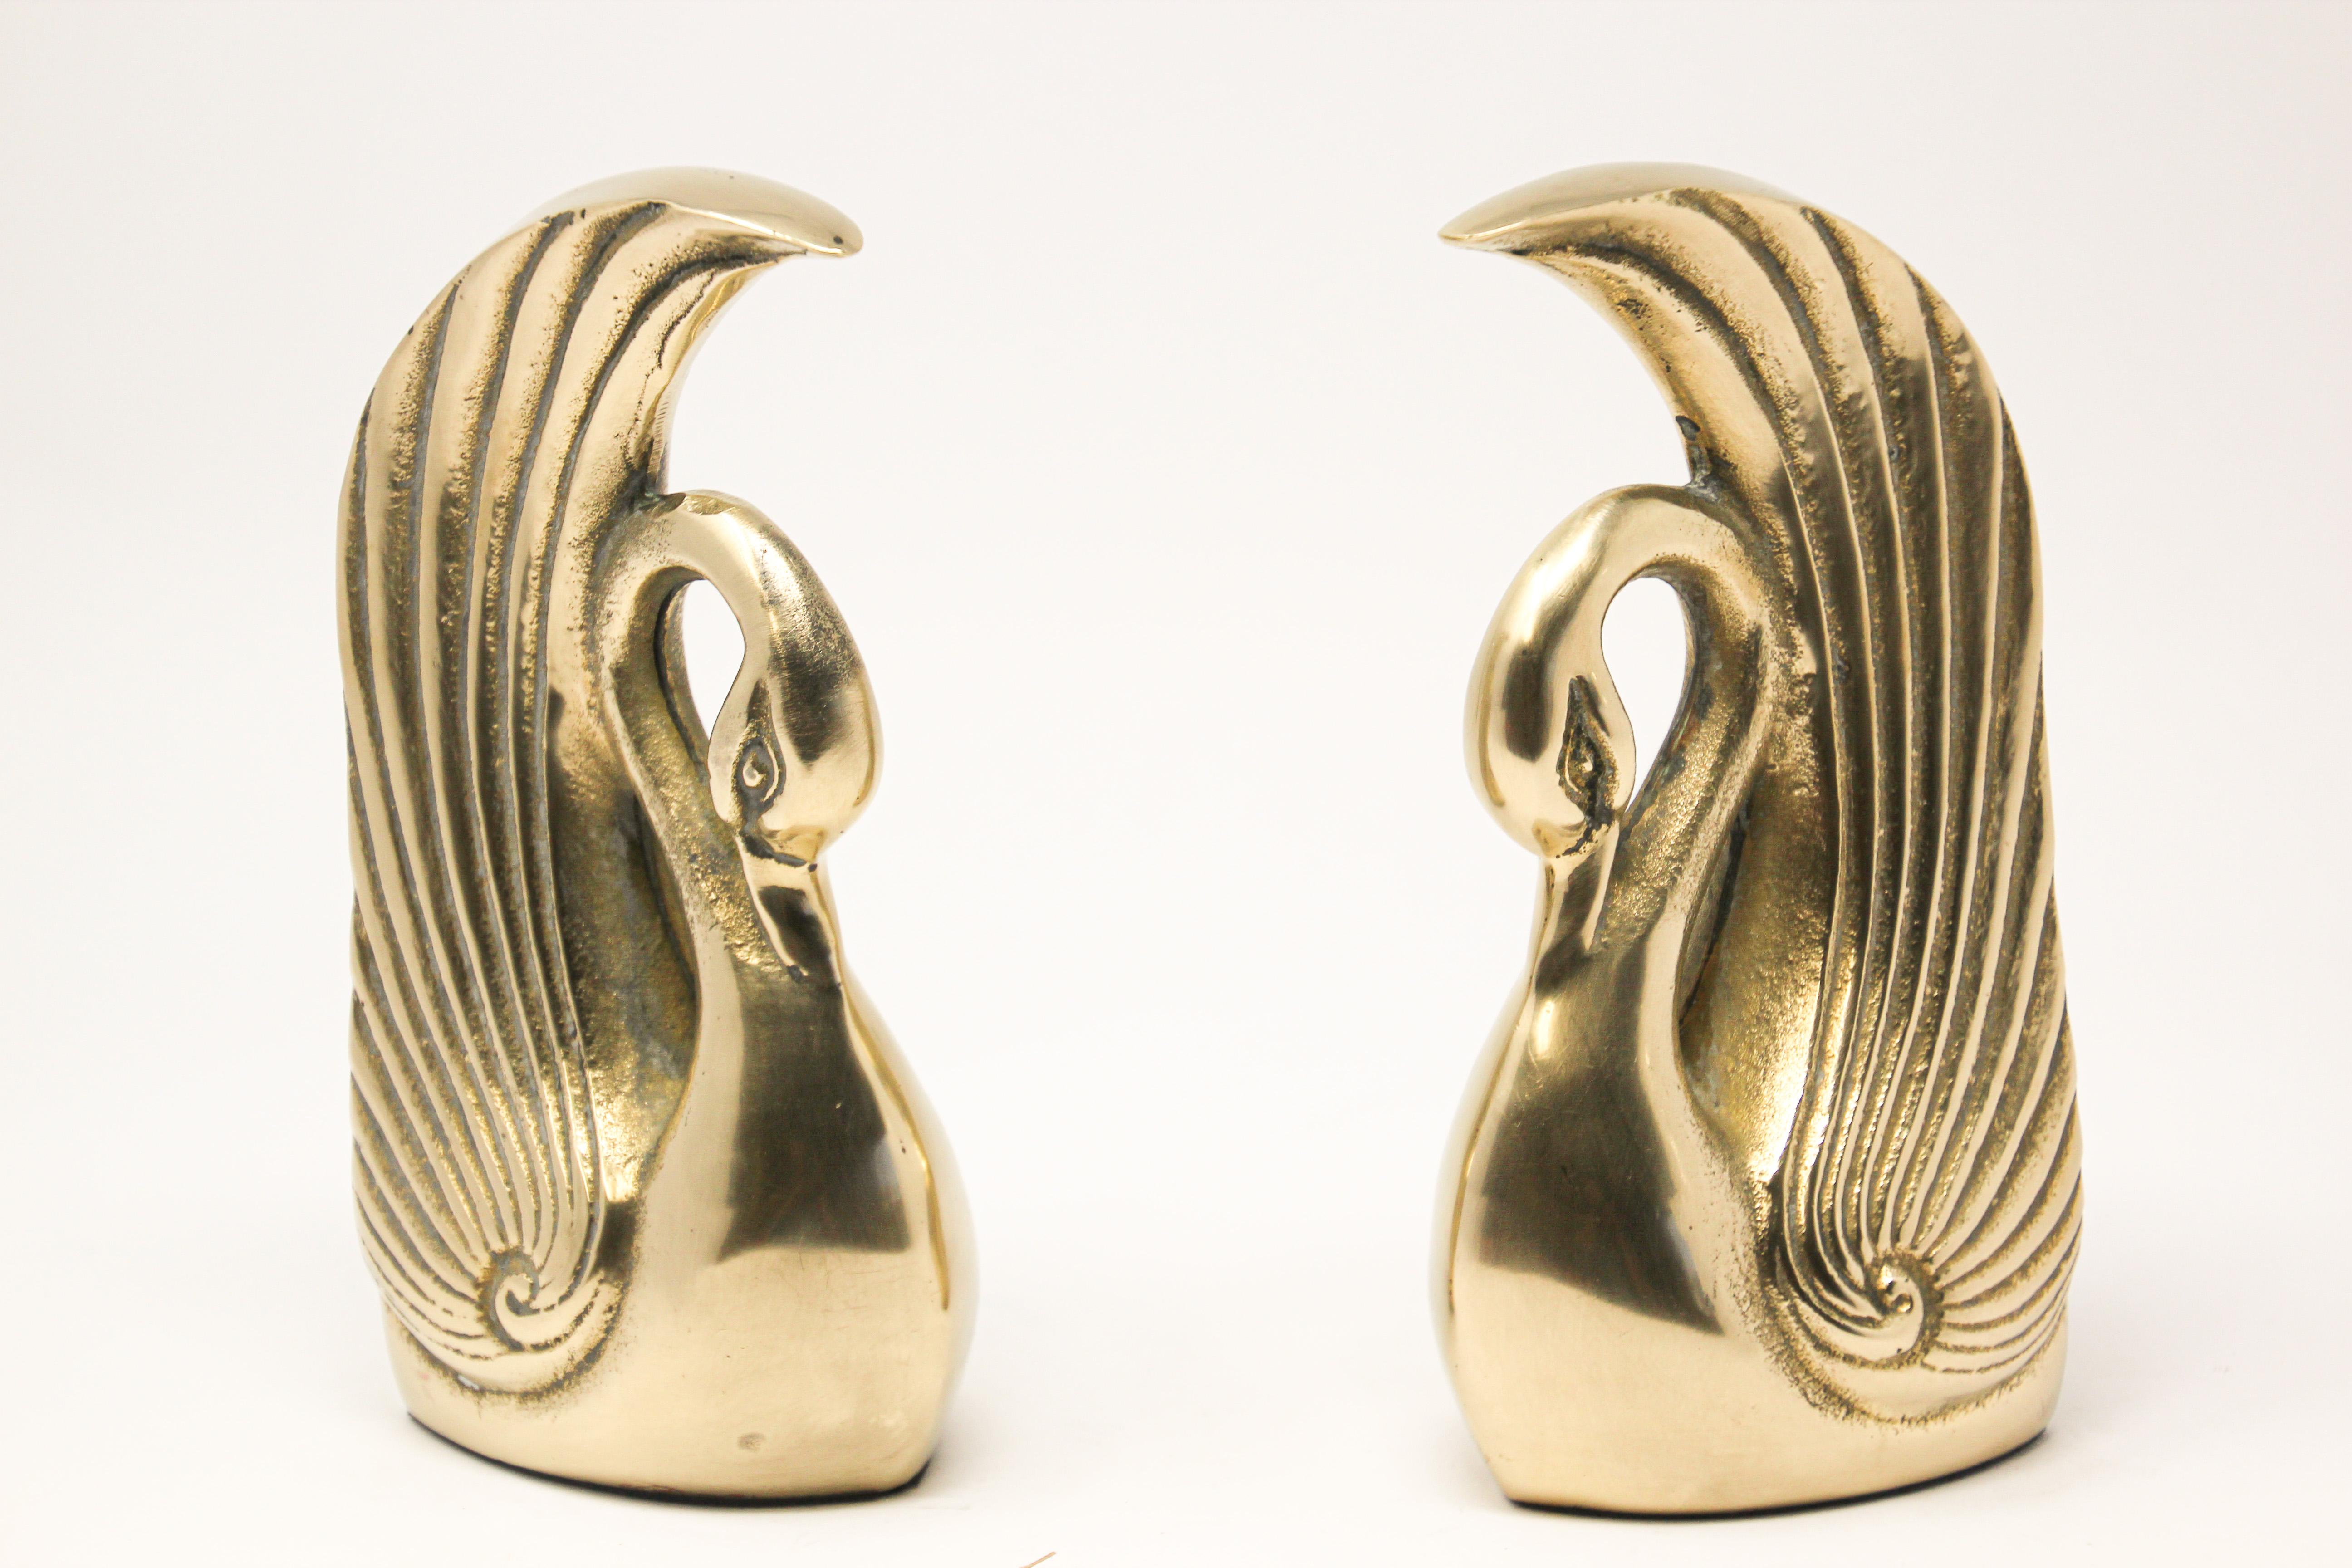 American Pair of Vintage Polished Cast Brass Art Deco Swan Bookends, circa 1950